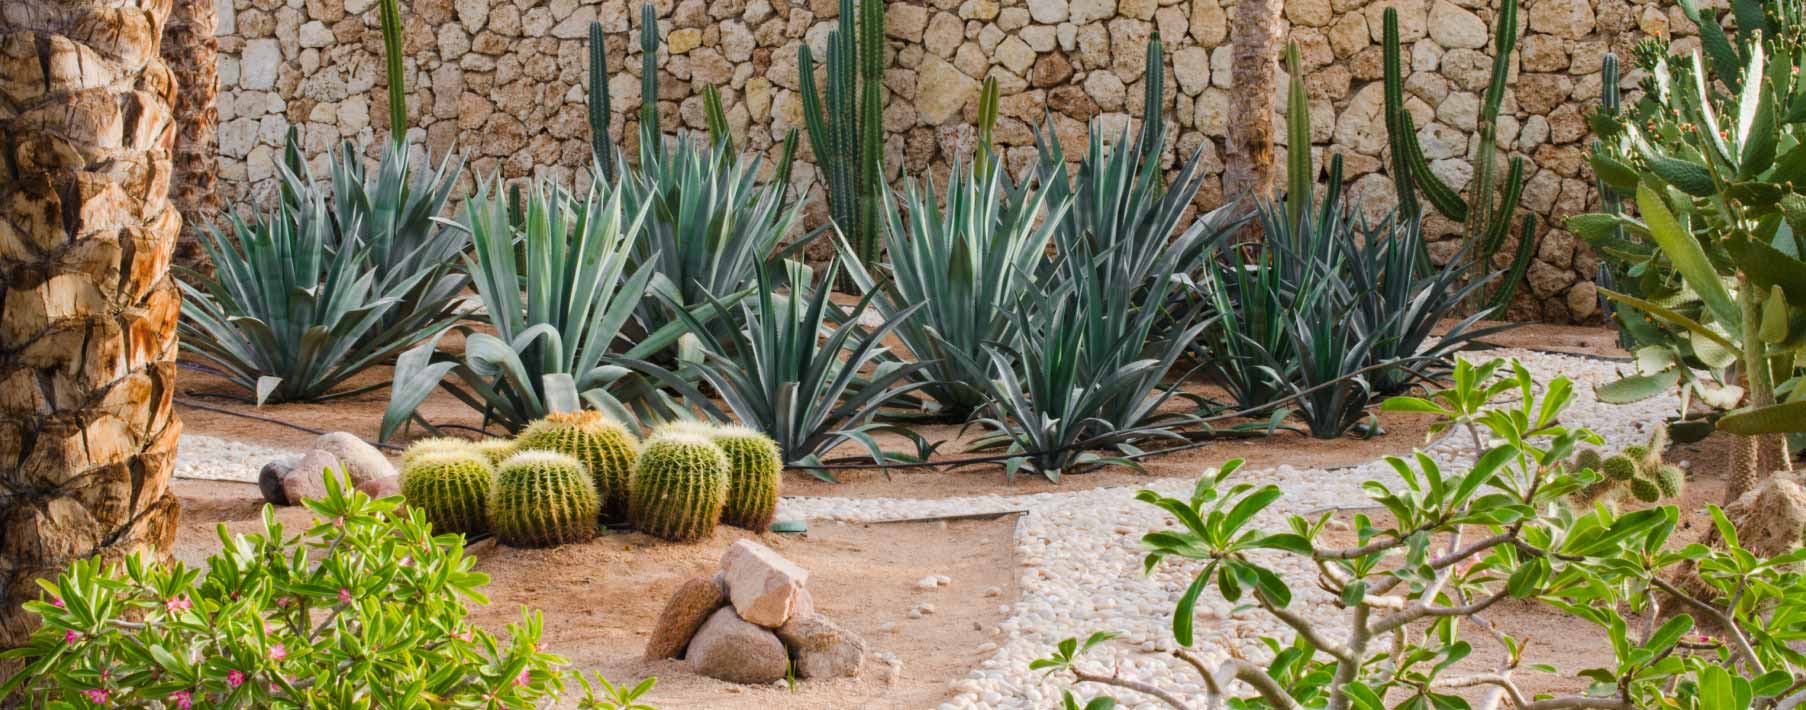 Image of a xeriscaped lawn with cactus, gravel and other plants